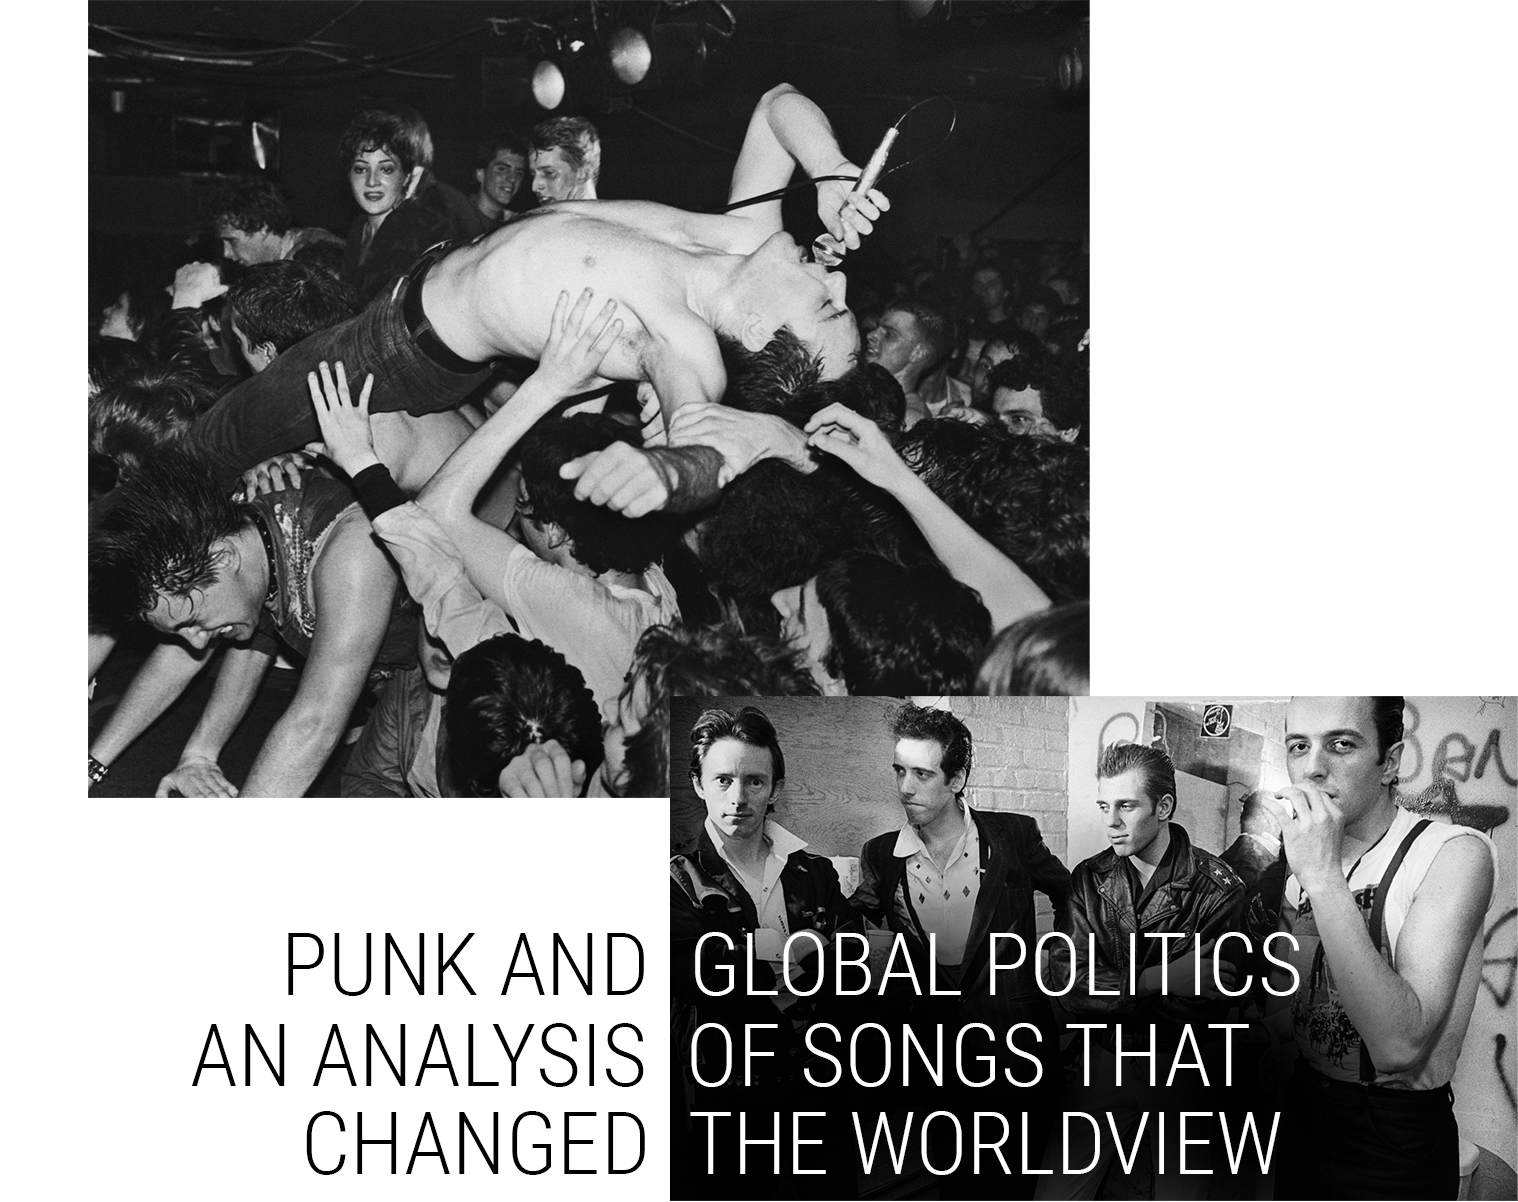 Punk-and-Global-Politics-An-Analysis-of-Songs-that-Changed-the-Worldview_header.3.jpg